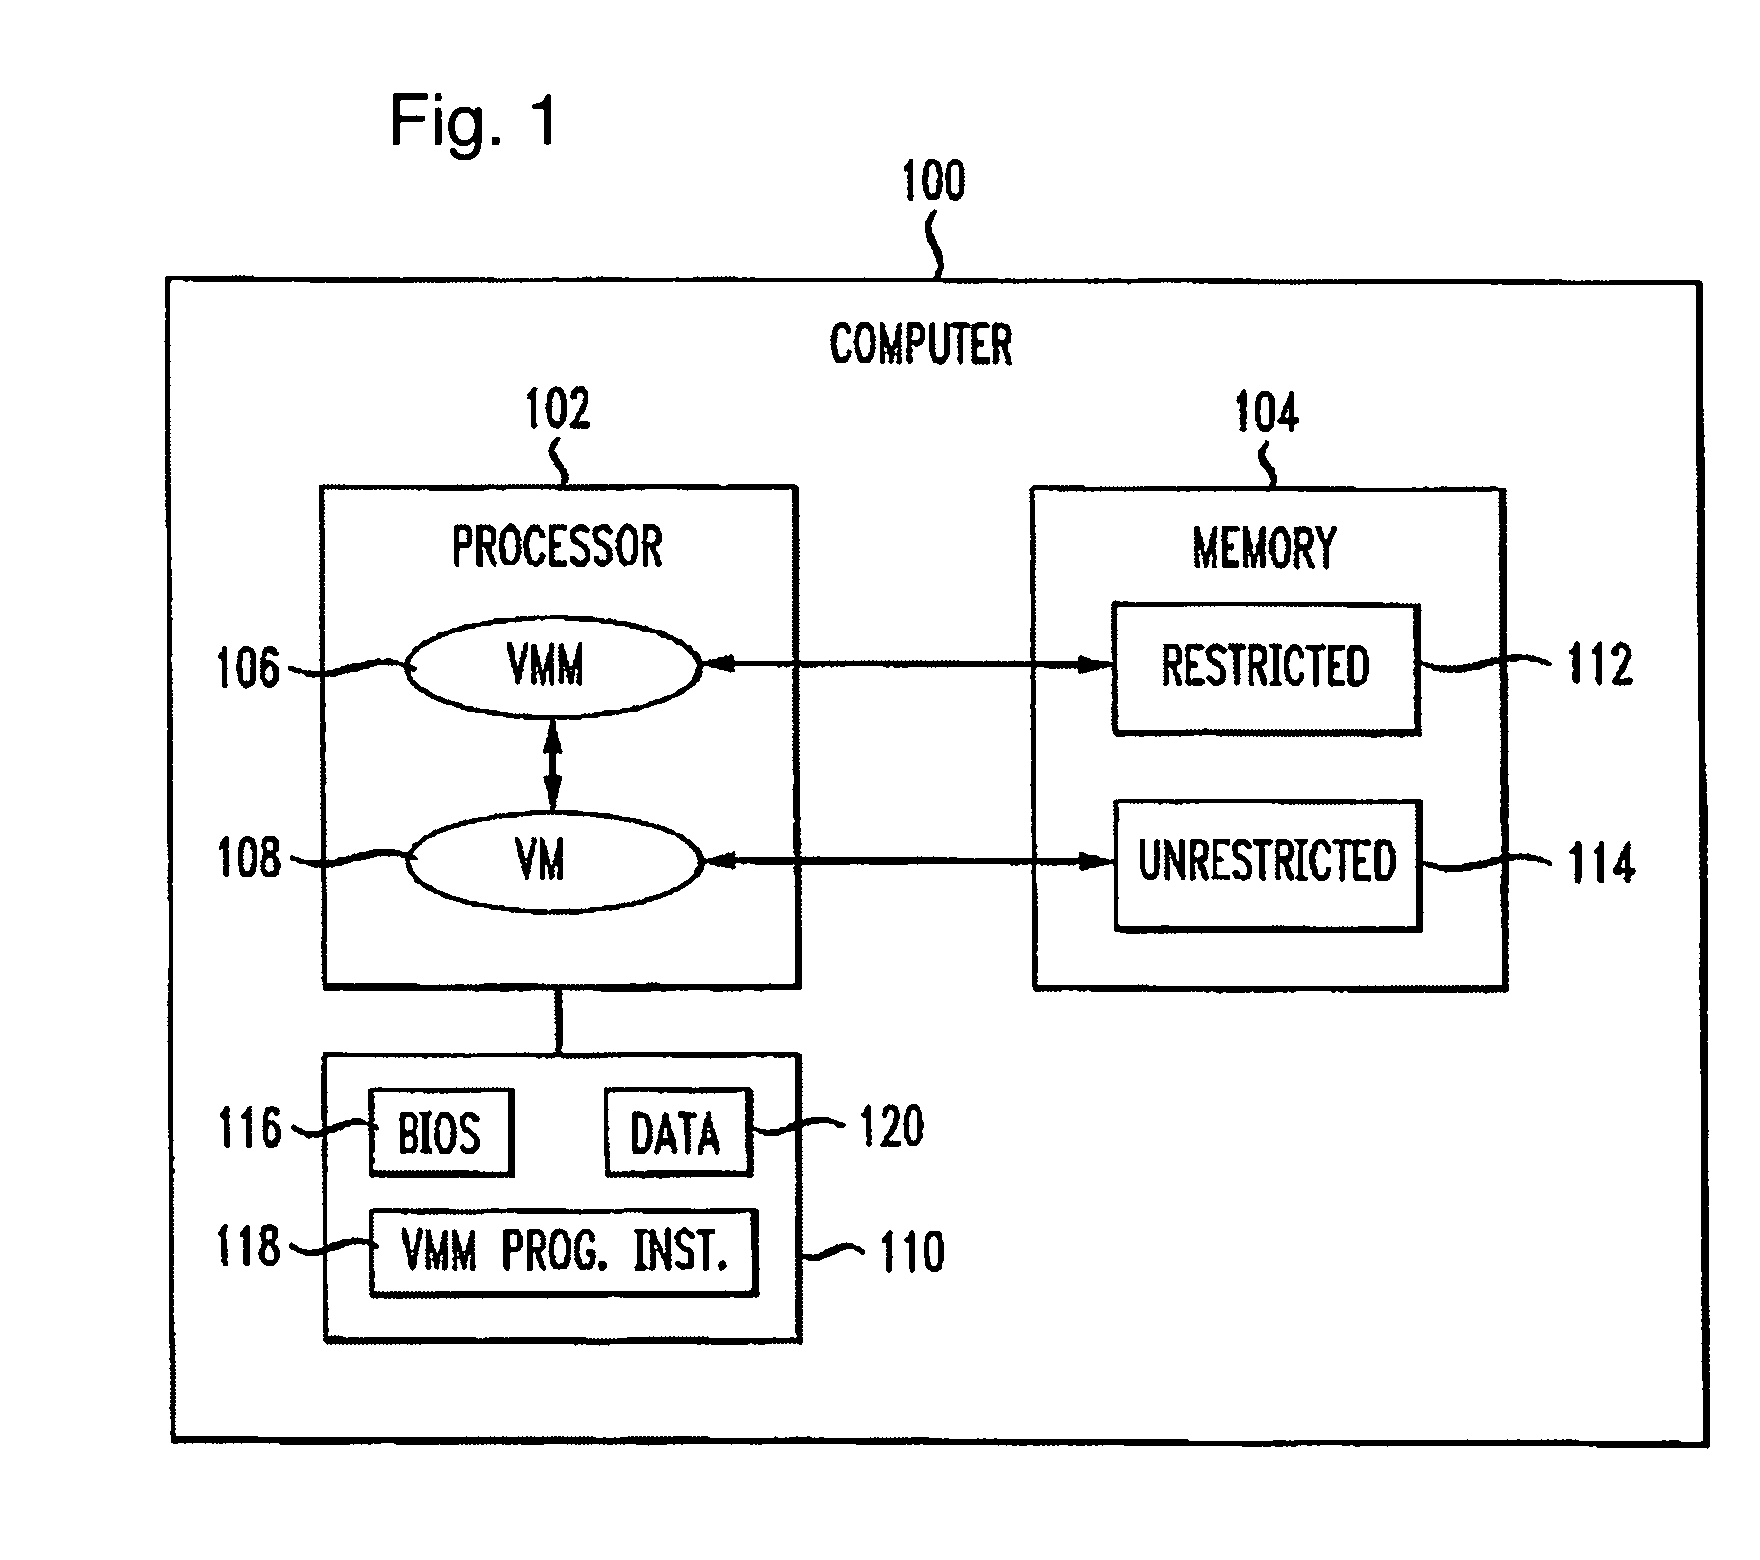 Virtualization-based security apparatuses, methods, and systems